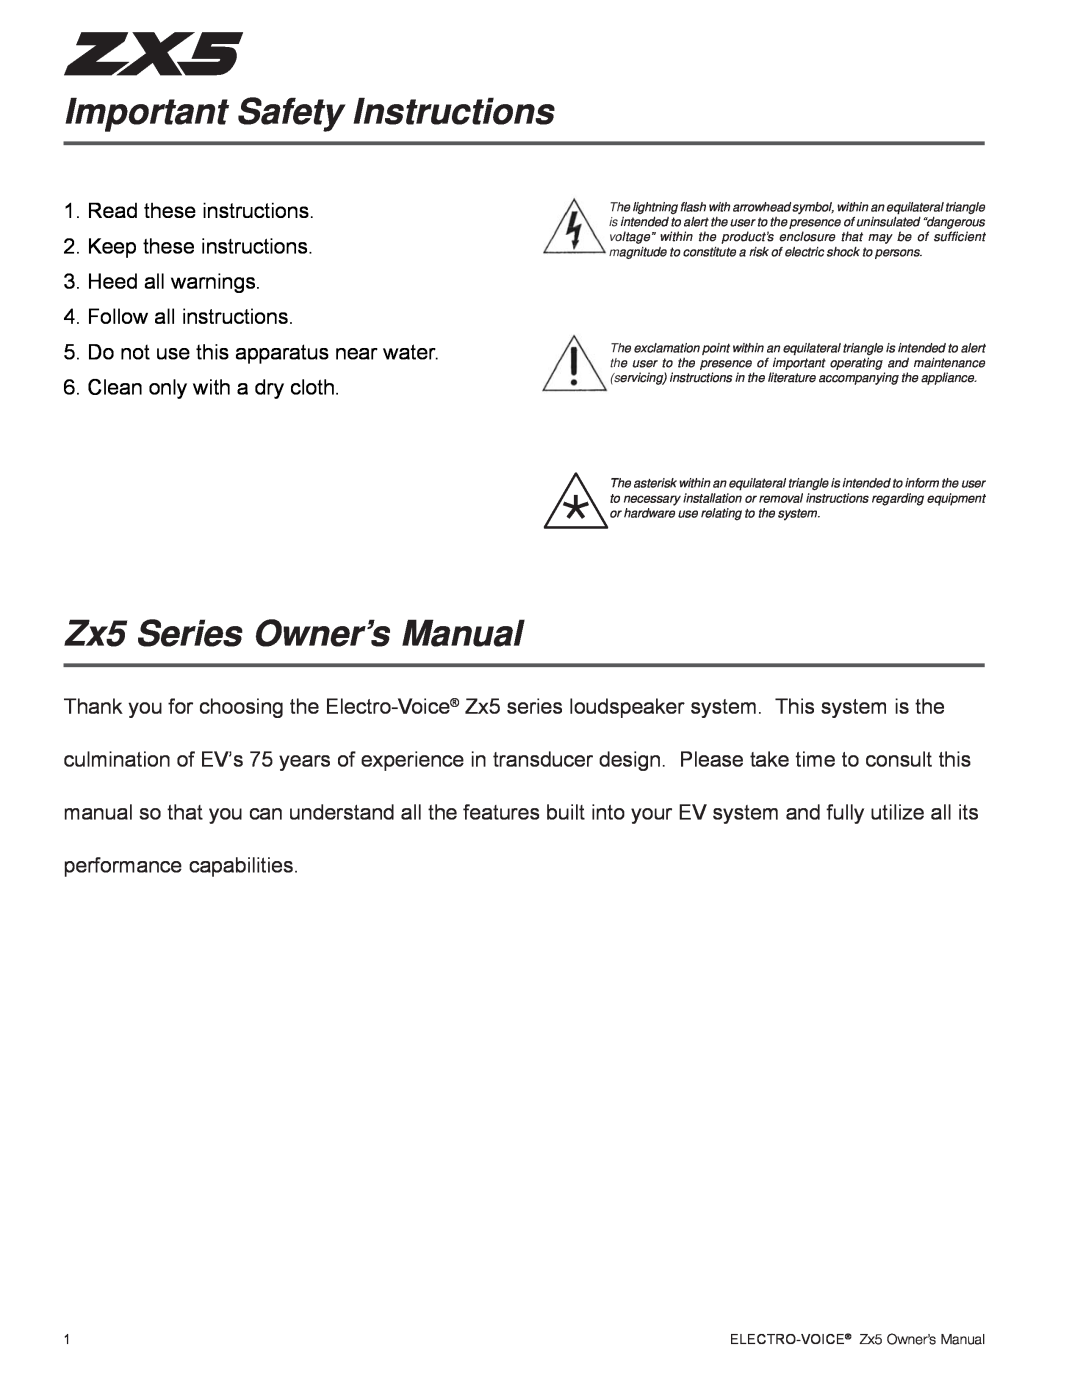 Electro-Voice ZX5 Series owner manual Important Safety Instructions, Read these instructions, Follow all instructions 